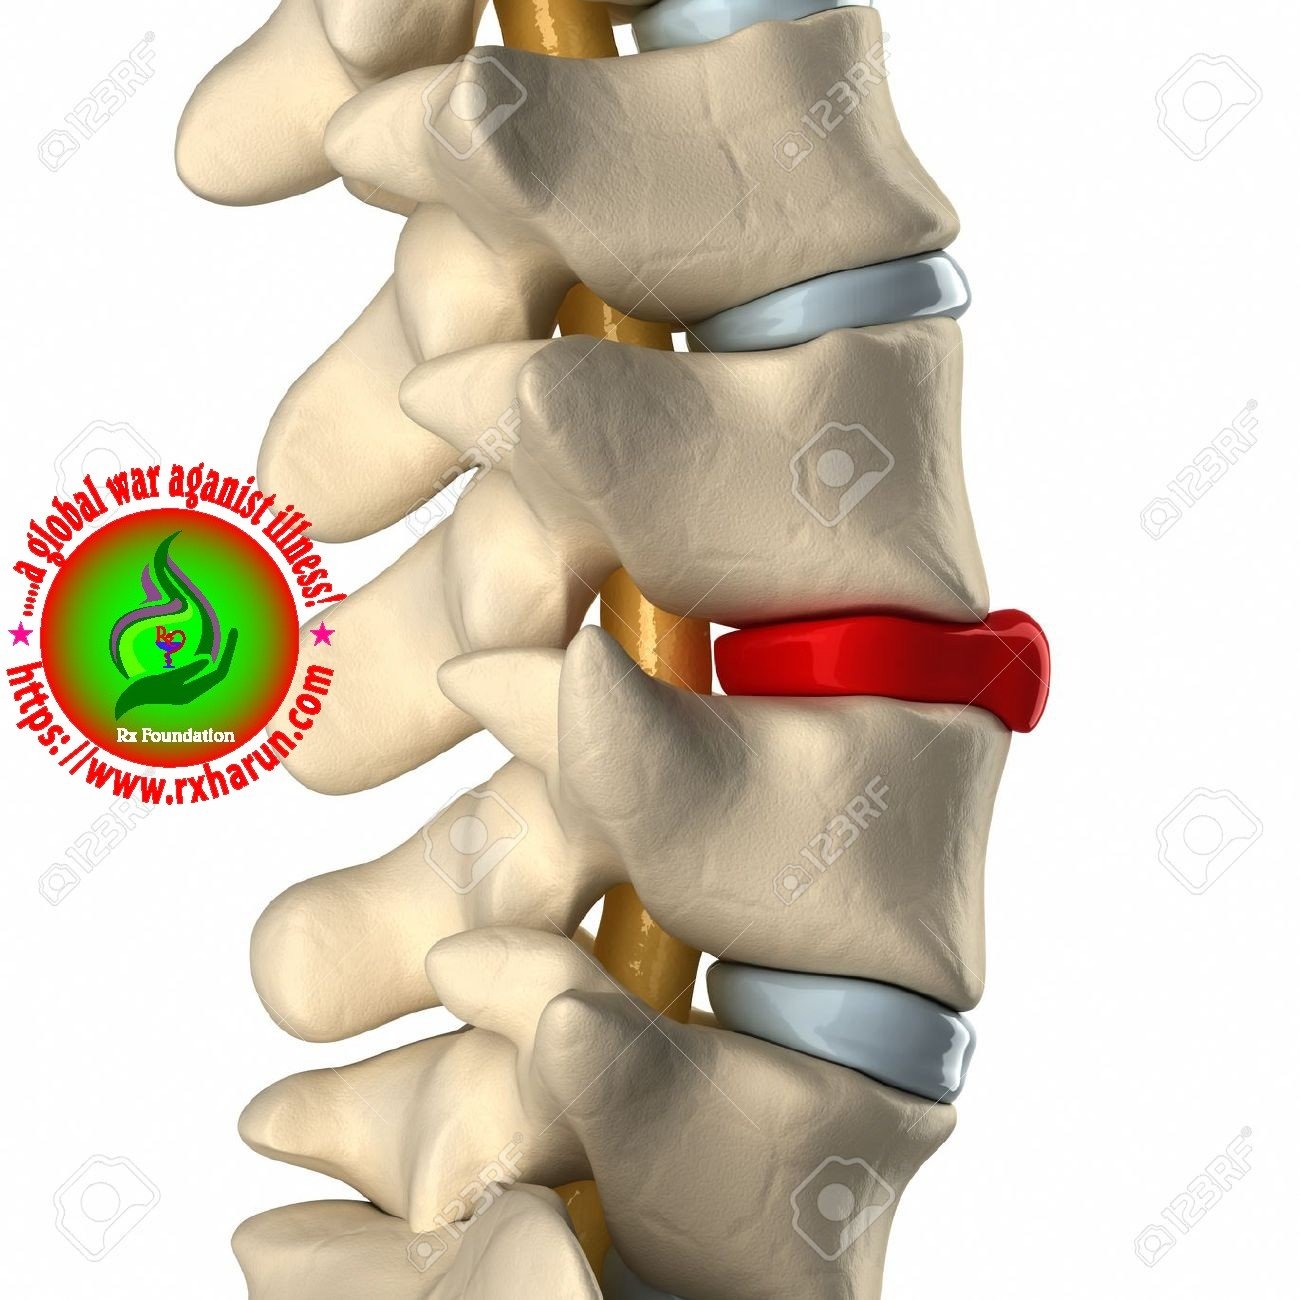 L4 and S1 Disc Herniation